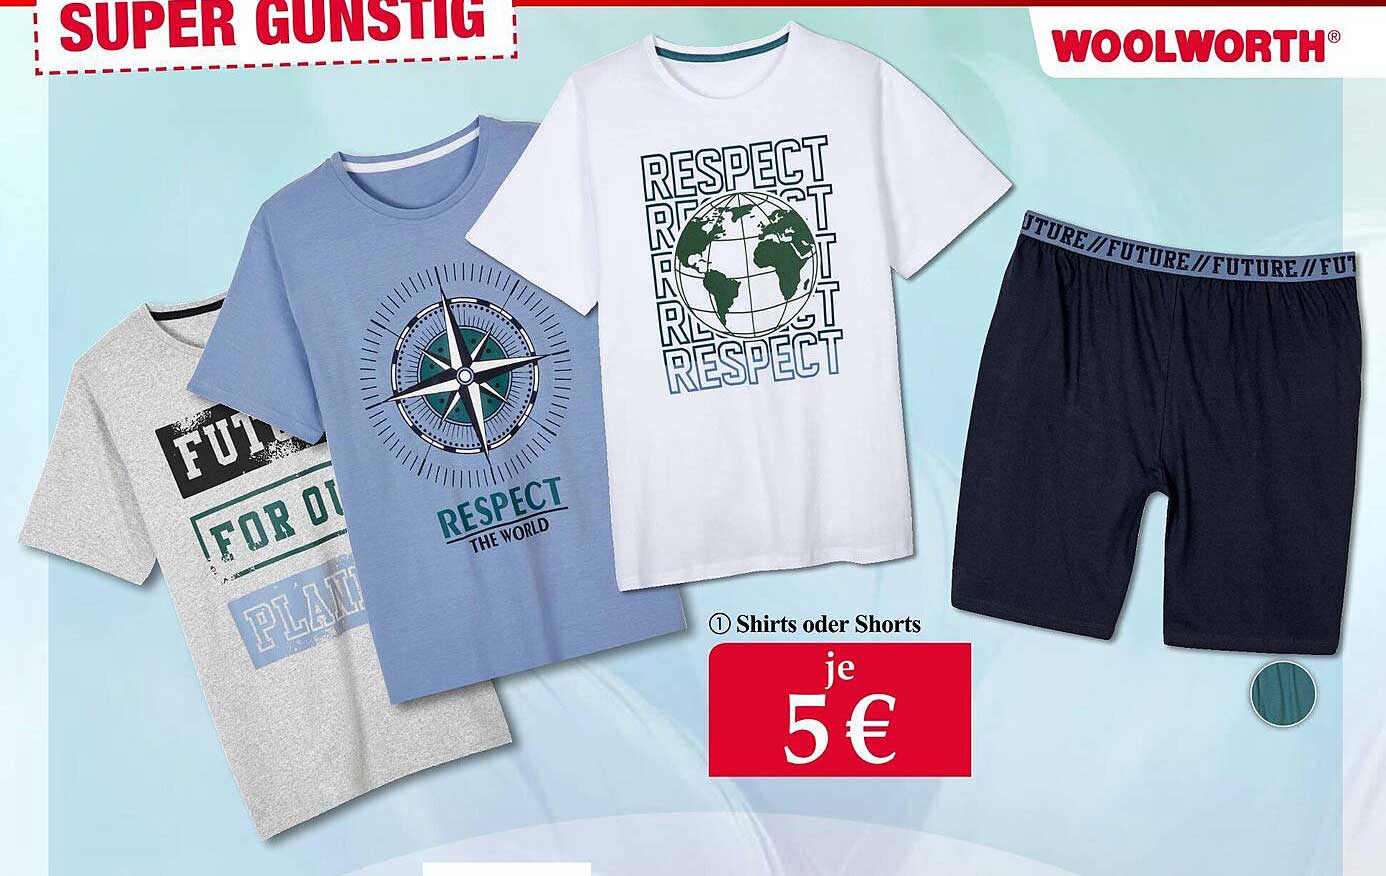 Woolworth Shirts Oder Shorts